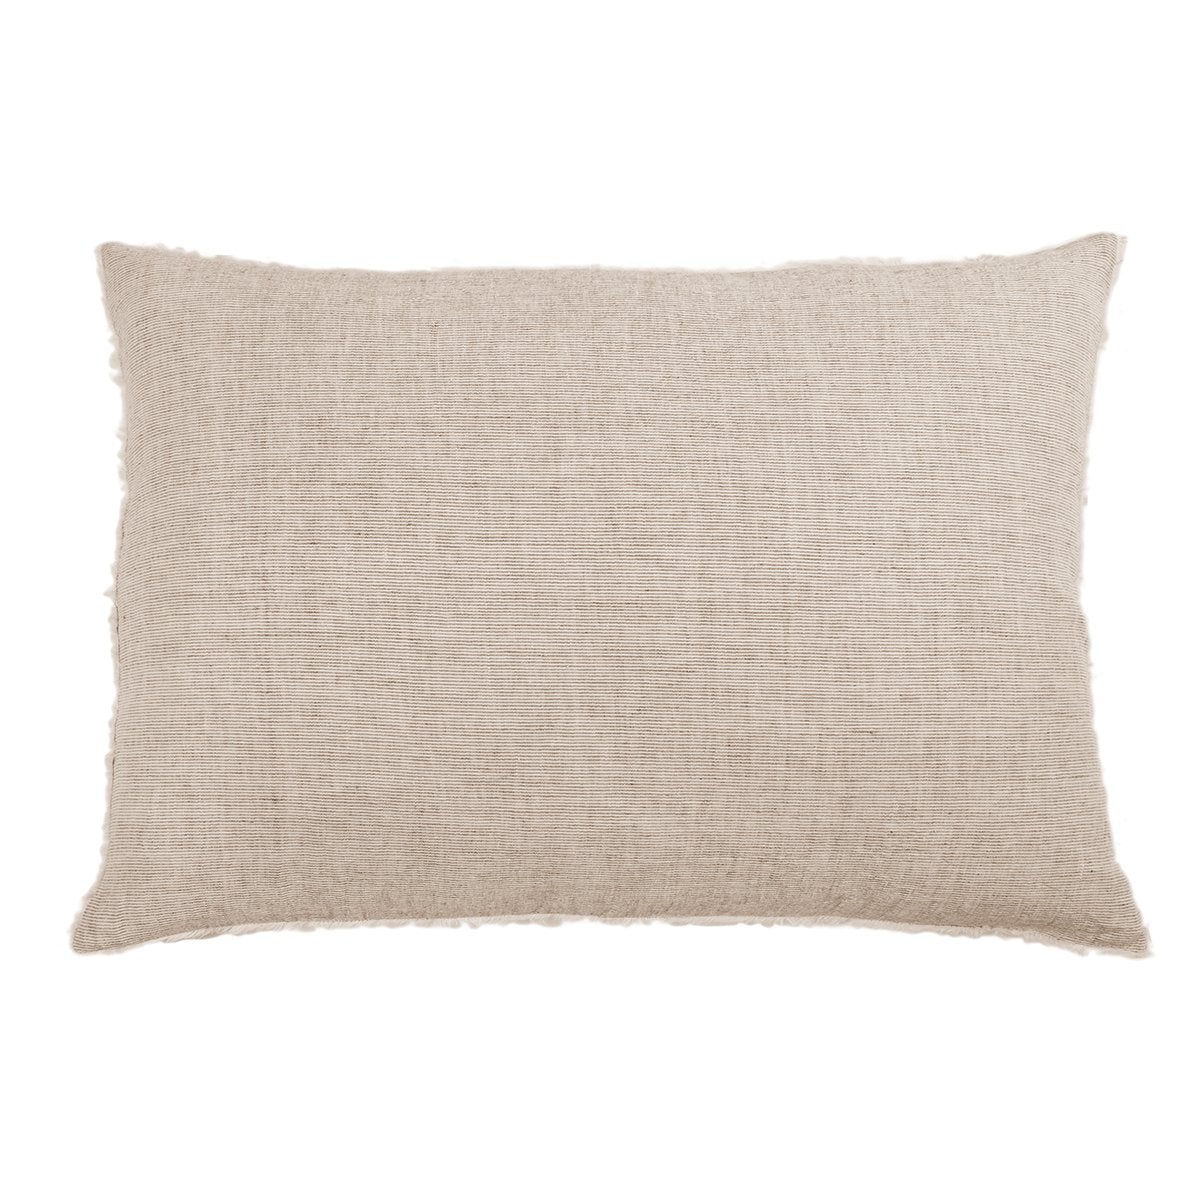 Logan Terra Cotta Big Pillow by Pom at Home